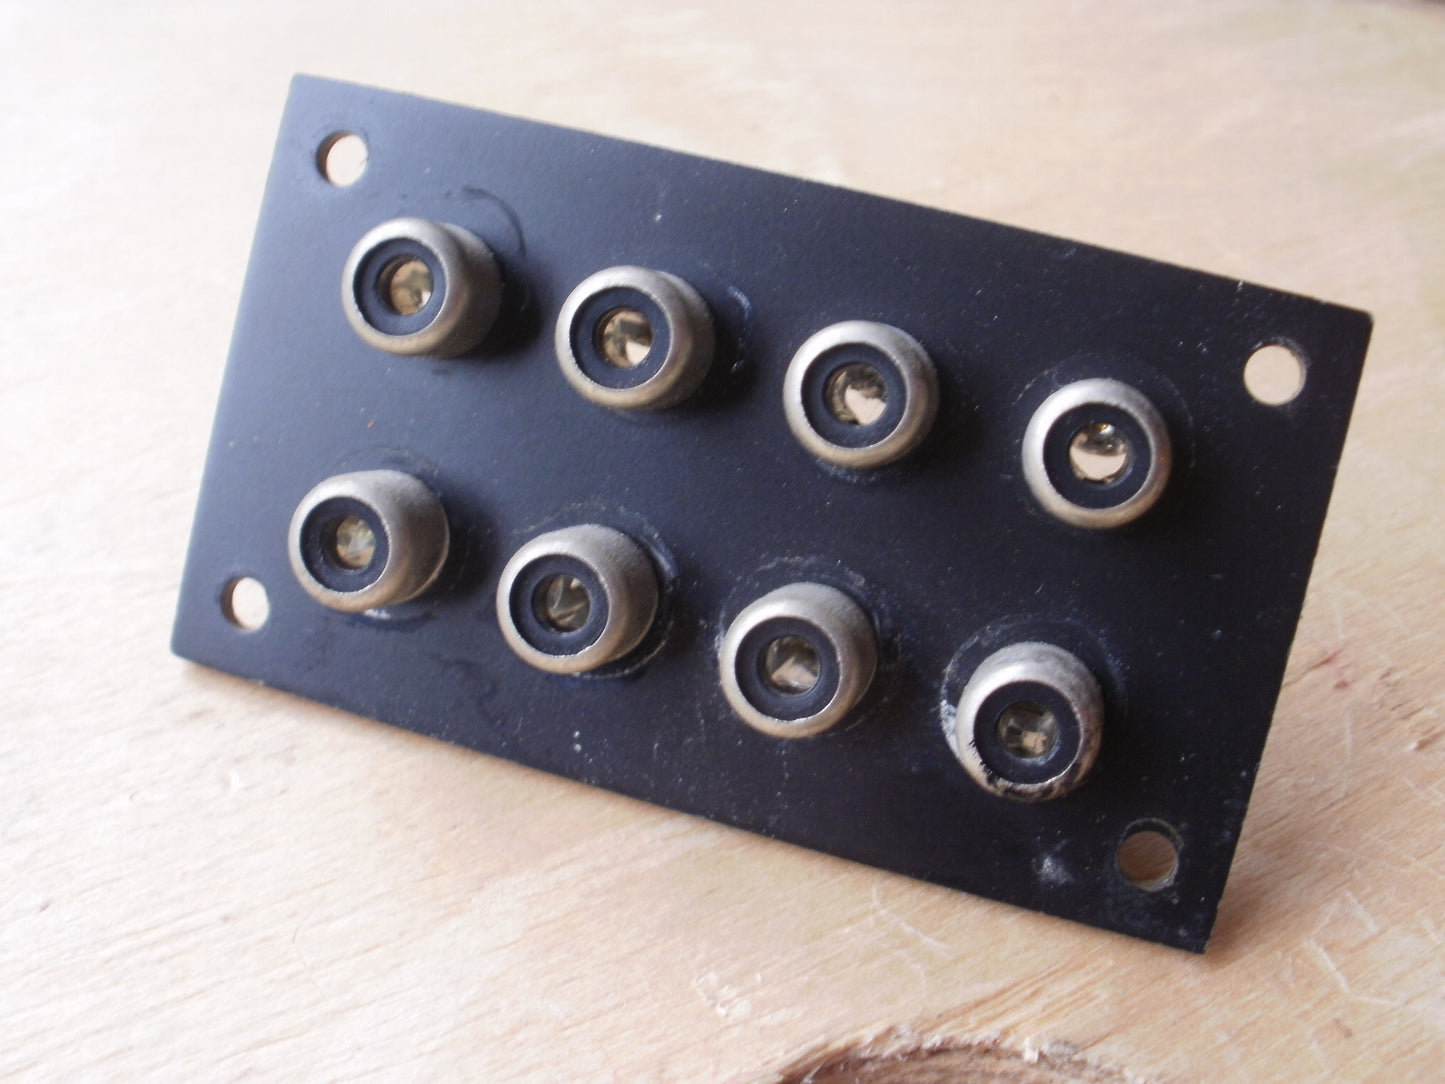 Tascam 133 8 phono socket connector